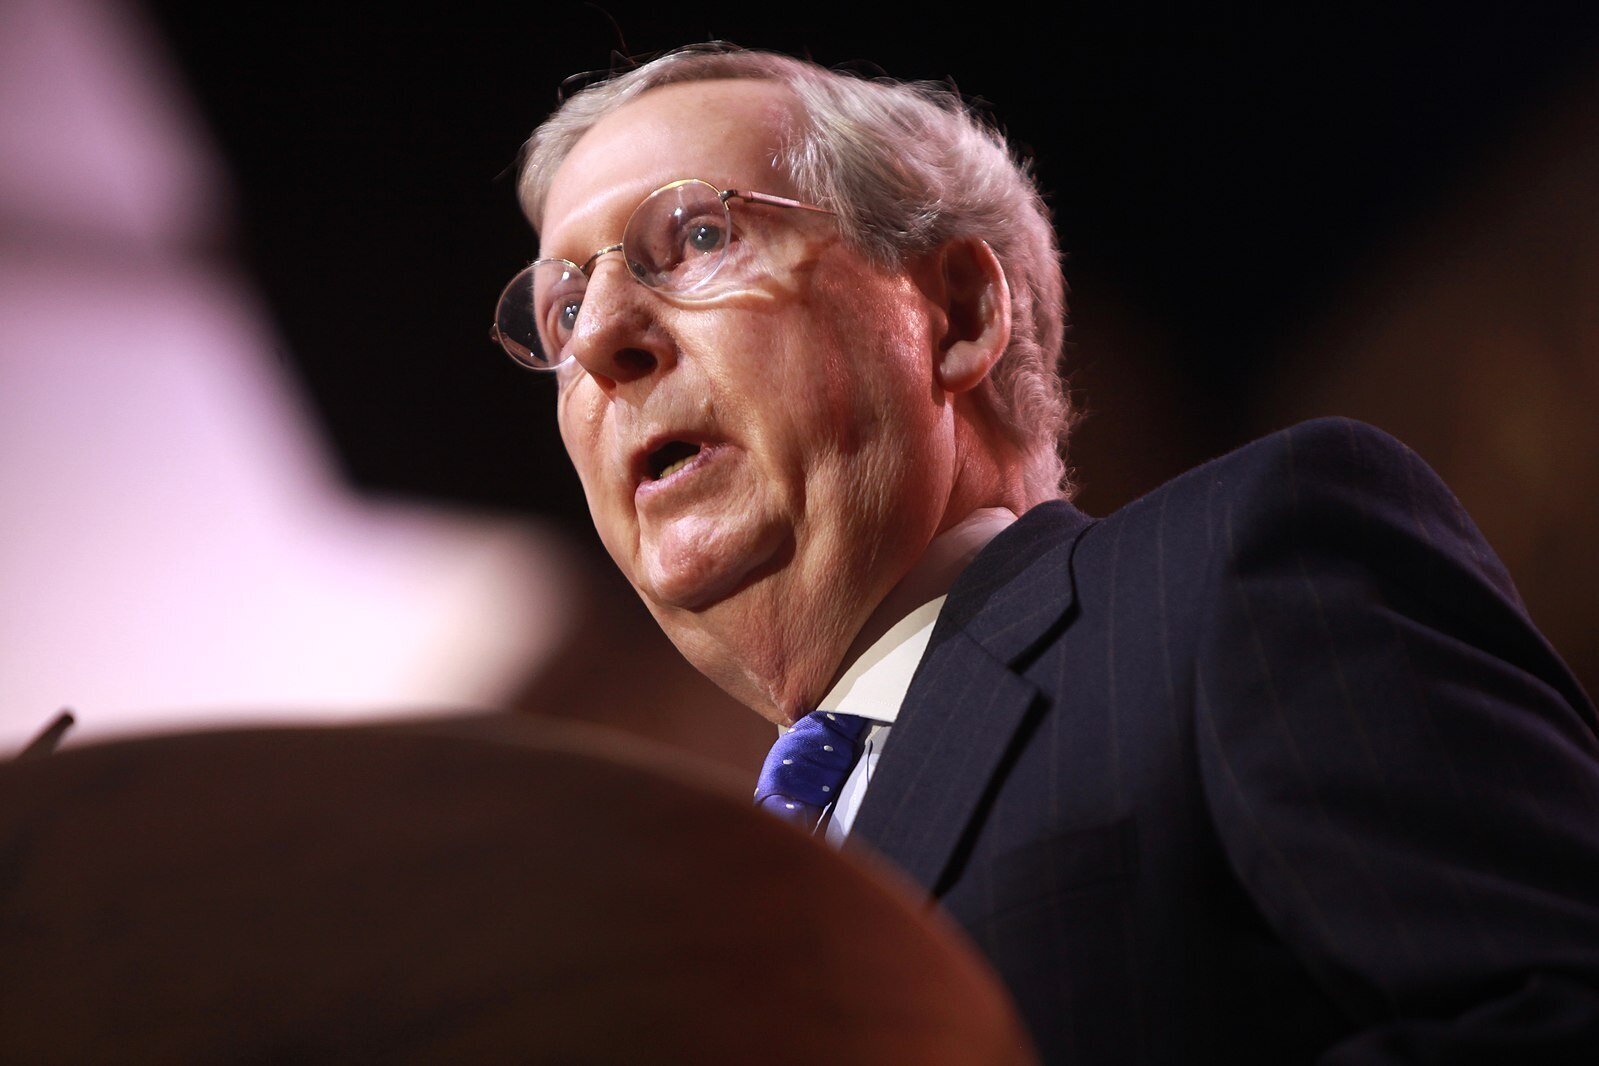 March 6th, 2014 – Senator Mitch McConnell of Kentucky speaking at the 2014 Conservative Political Action Conference (CPAC) in National Harbor, Maryland. (Photo by Gage Skidmore | Wikimedia Commons)